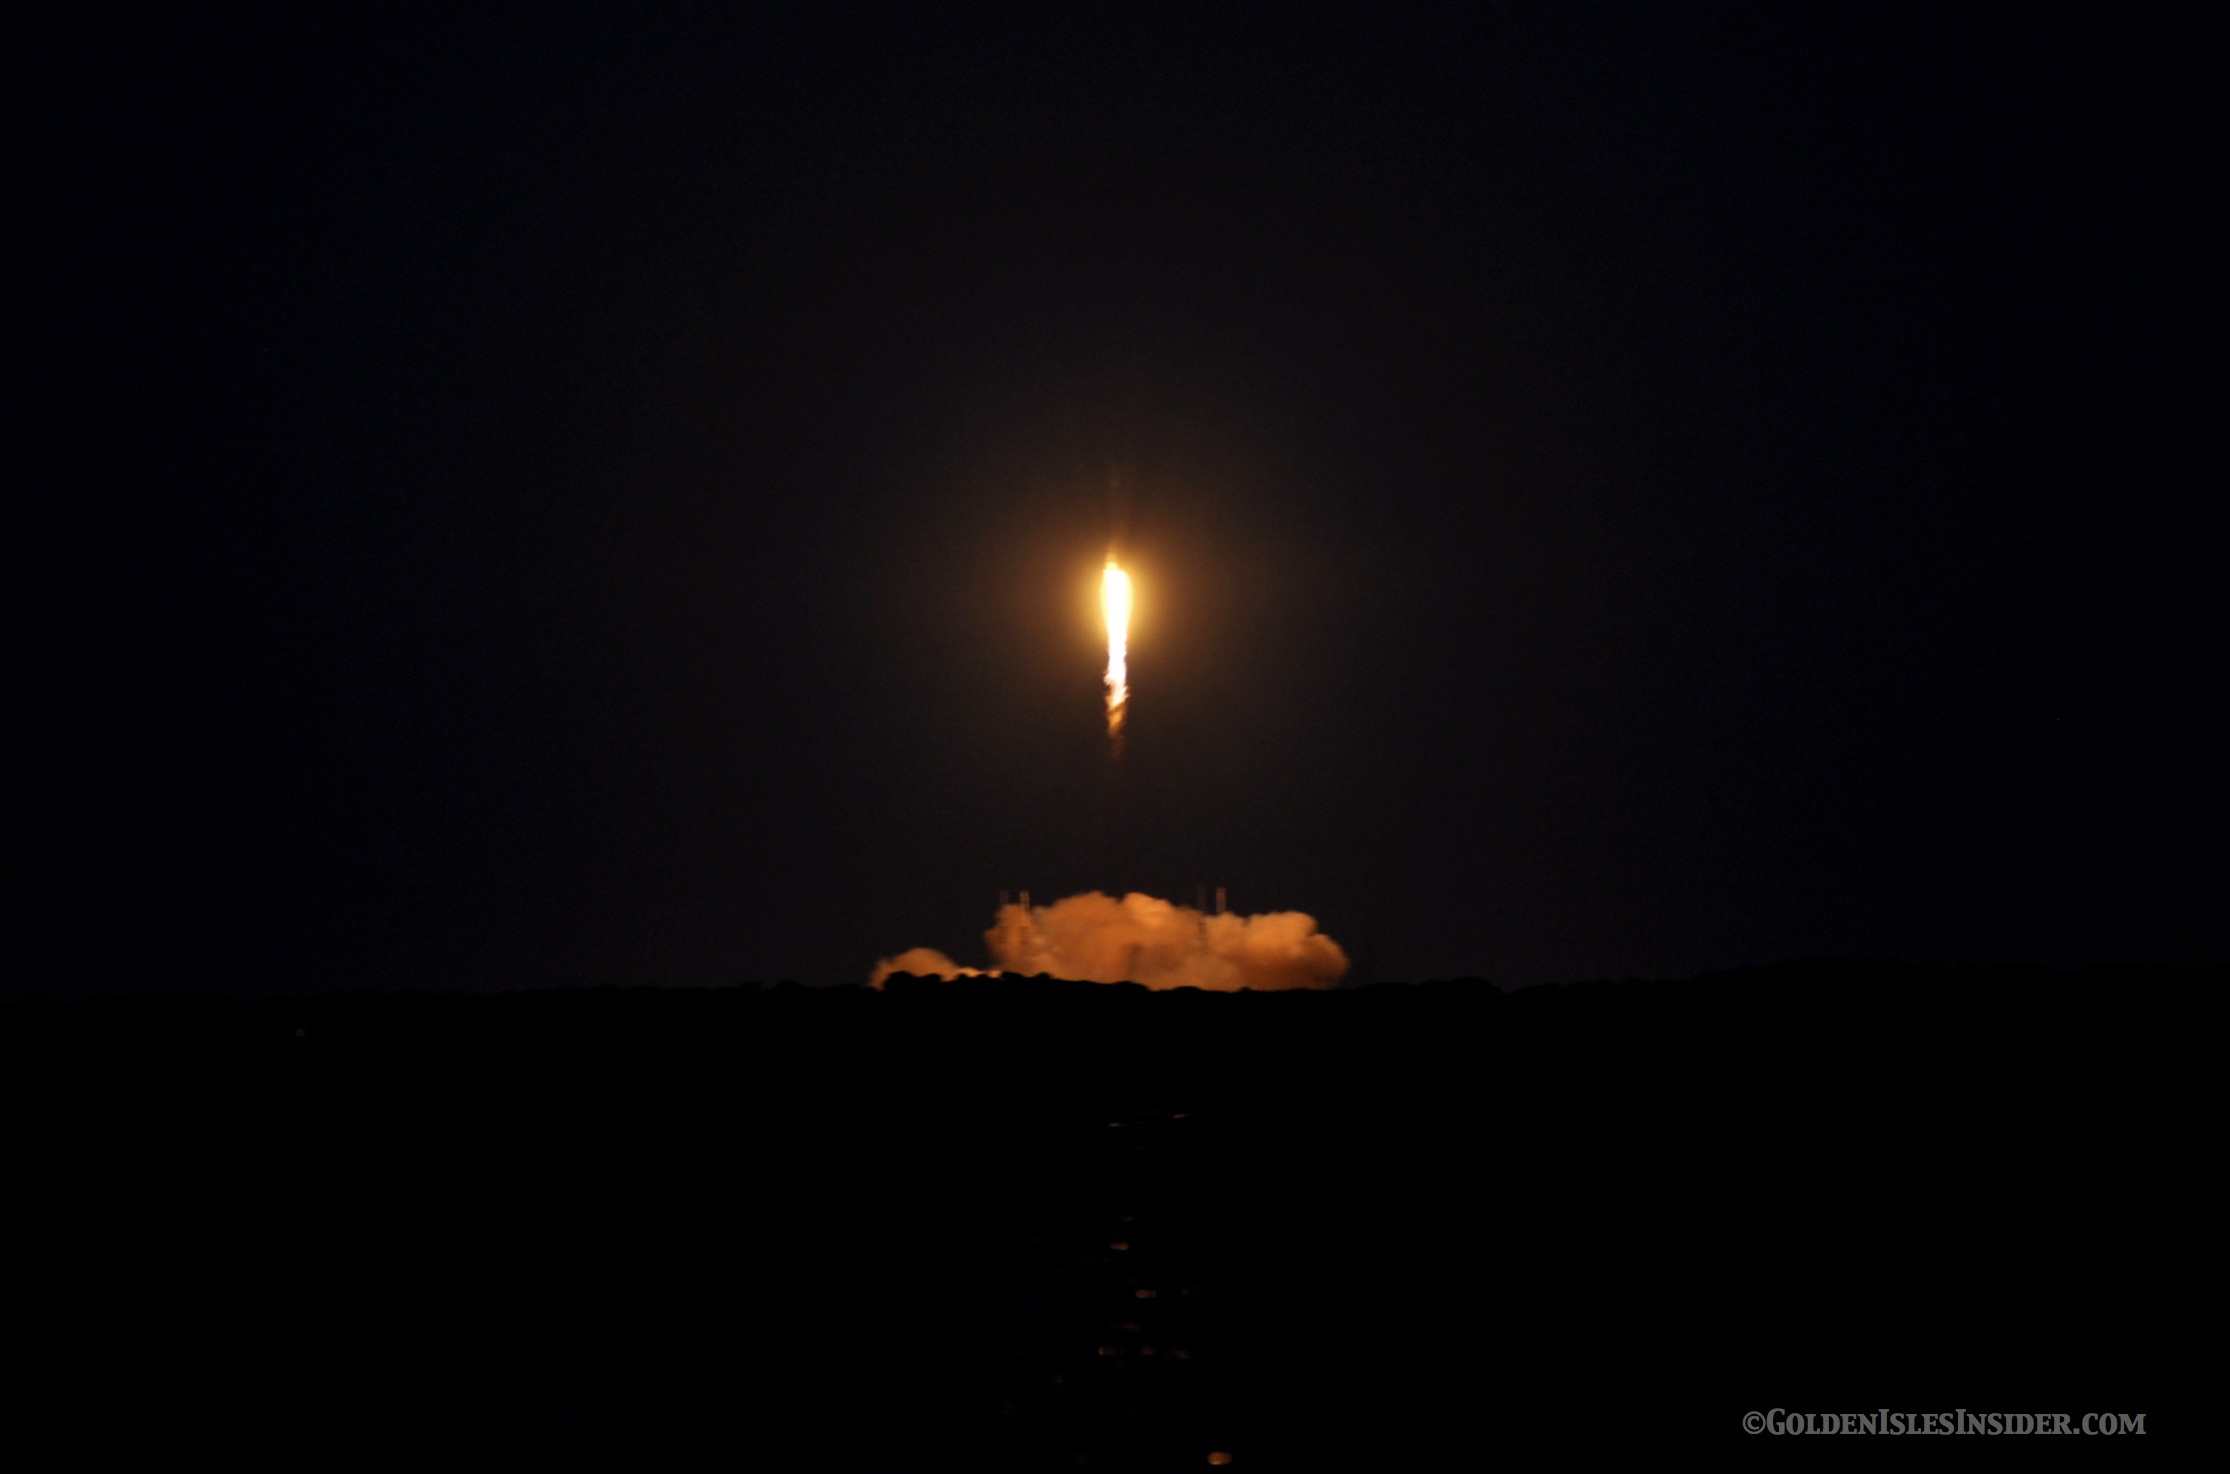 COSMIC COAST: SpaceX Sets Spaceflight Milestone With SES-8 Falcon 9 Launch